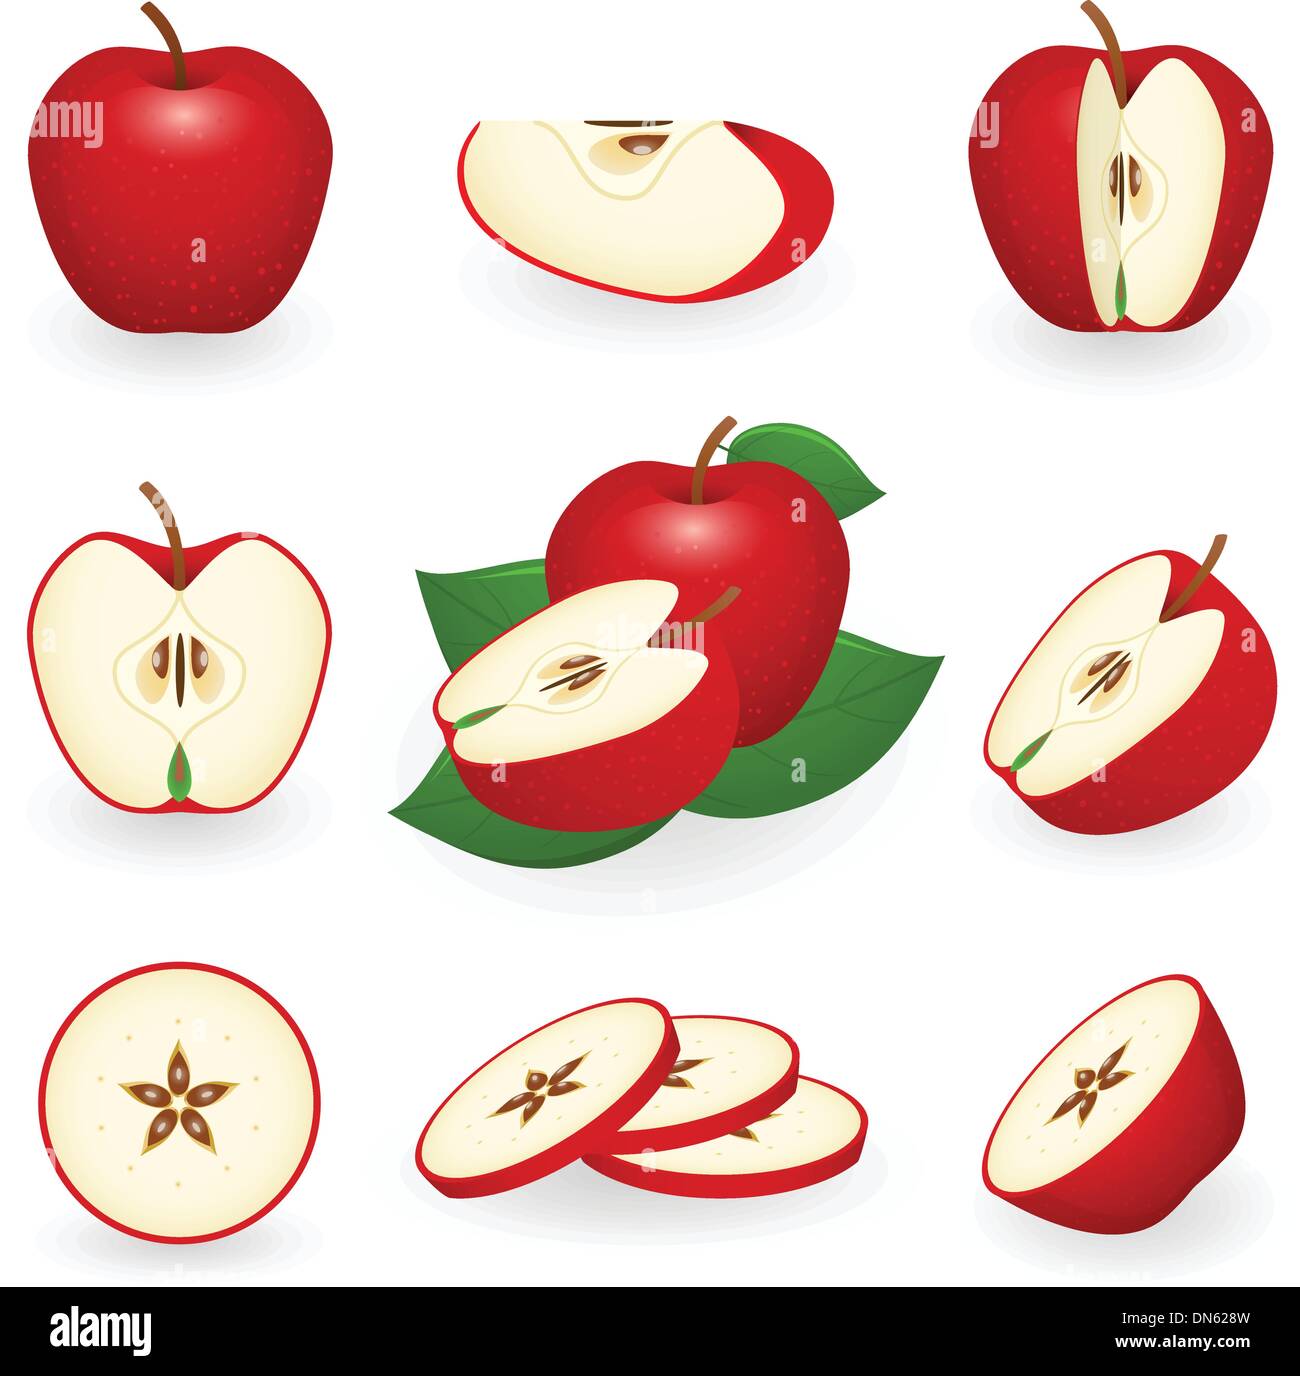 Red apple Stock Vector